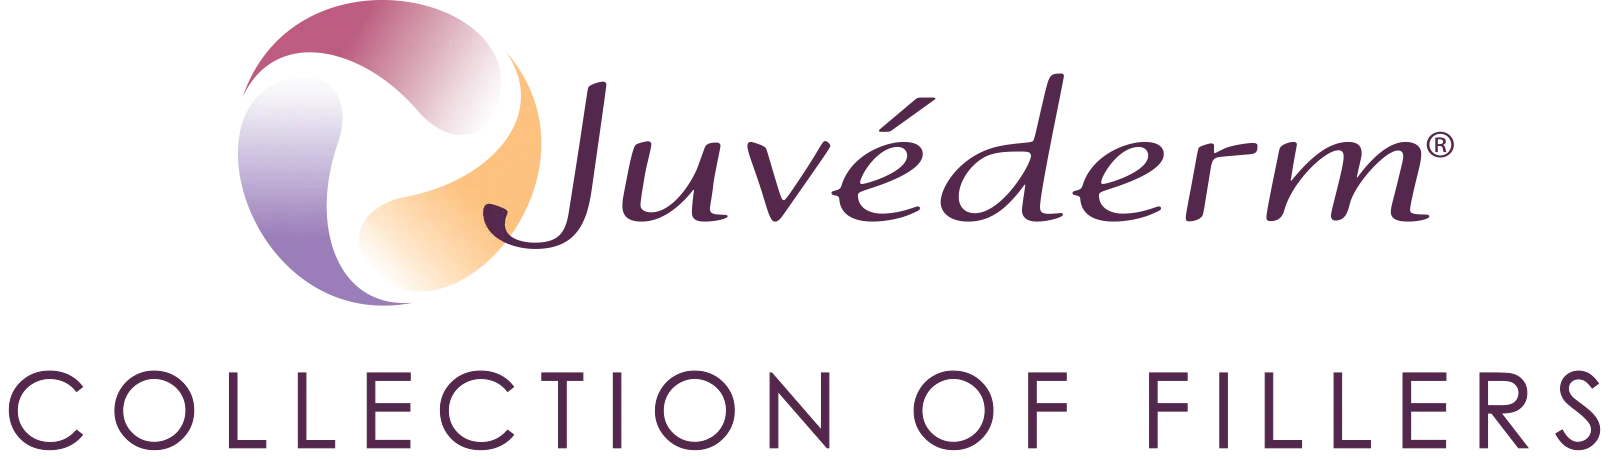 Juvederm Collection Of Fillers